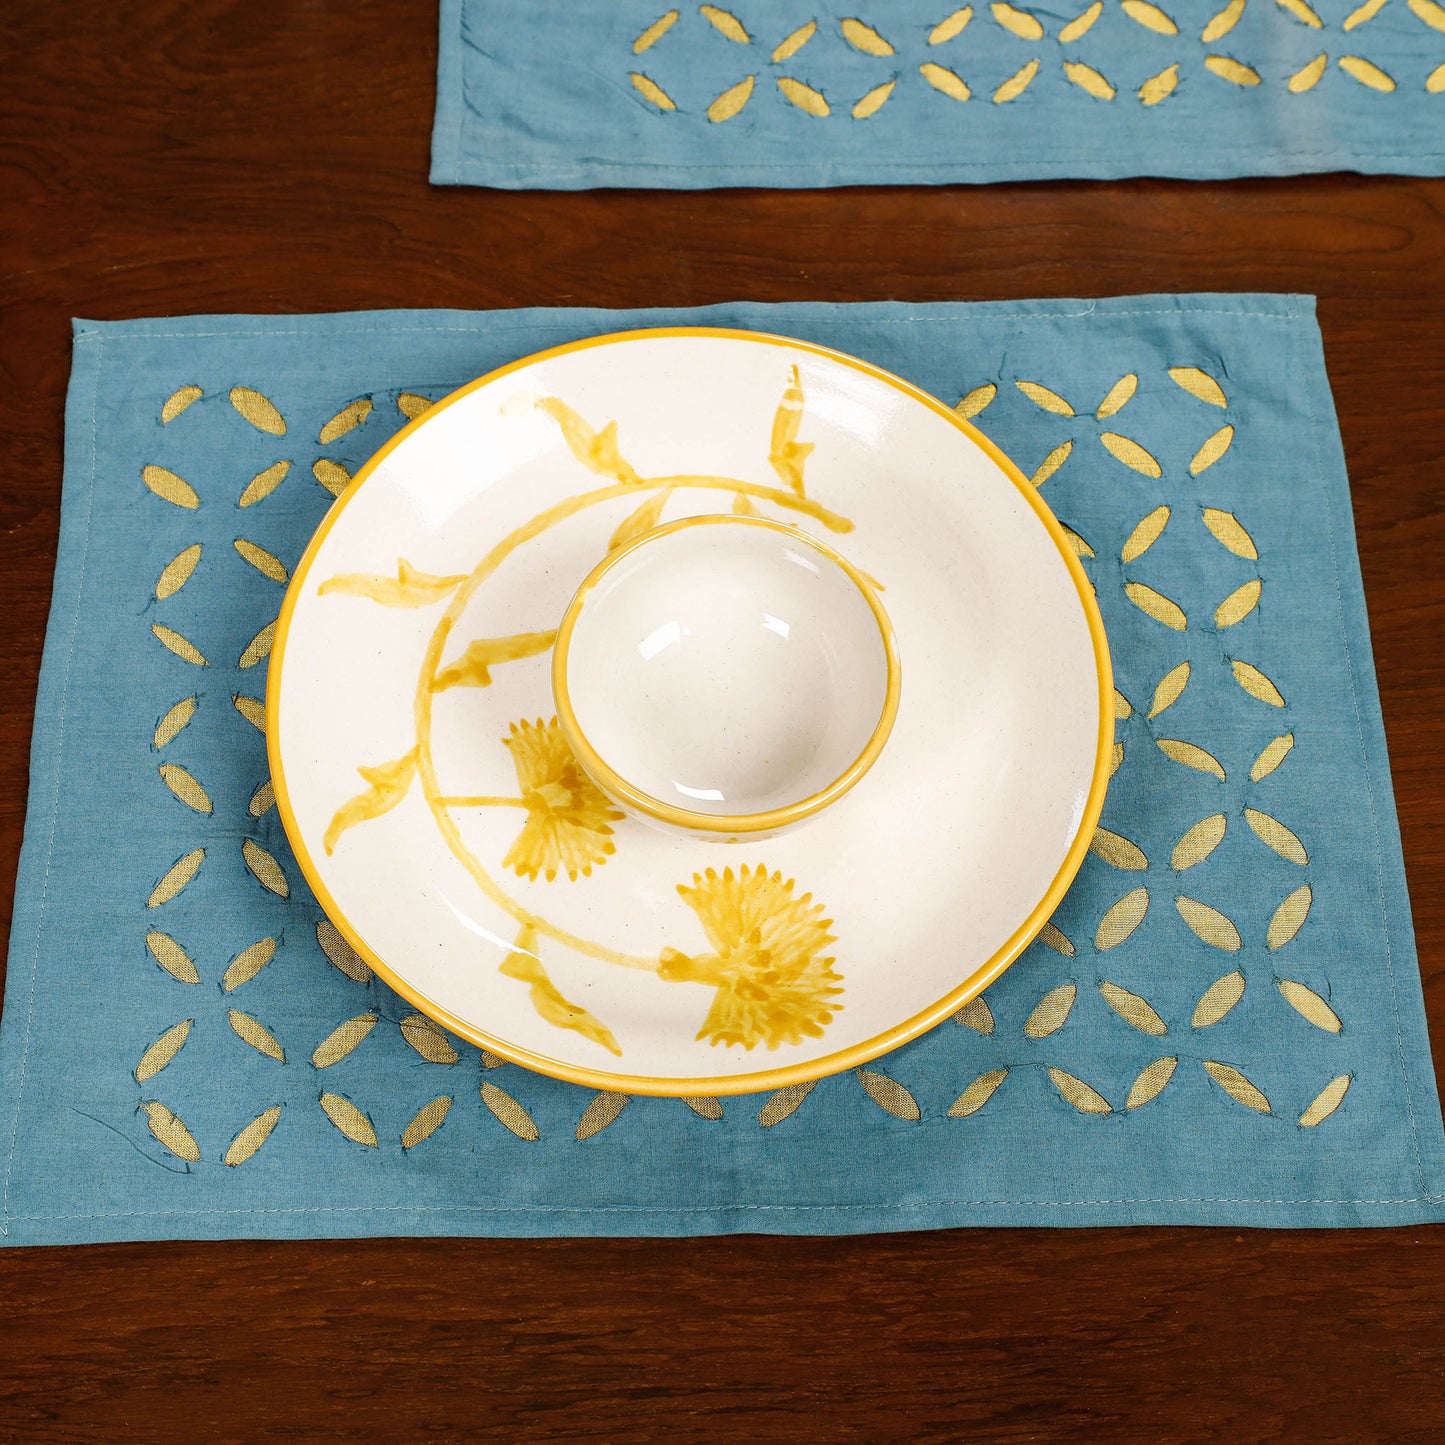 Applique Cut Work Cotton Table Runner with Table Mats (set of 6)